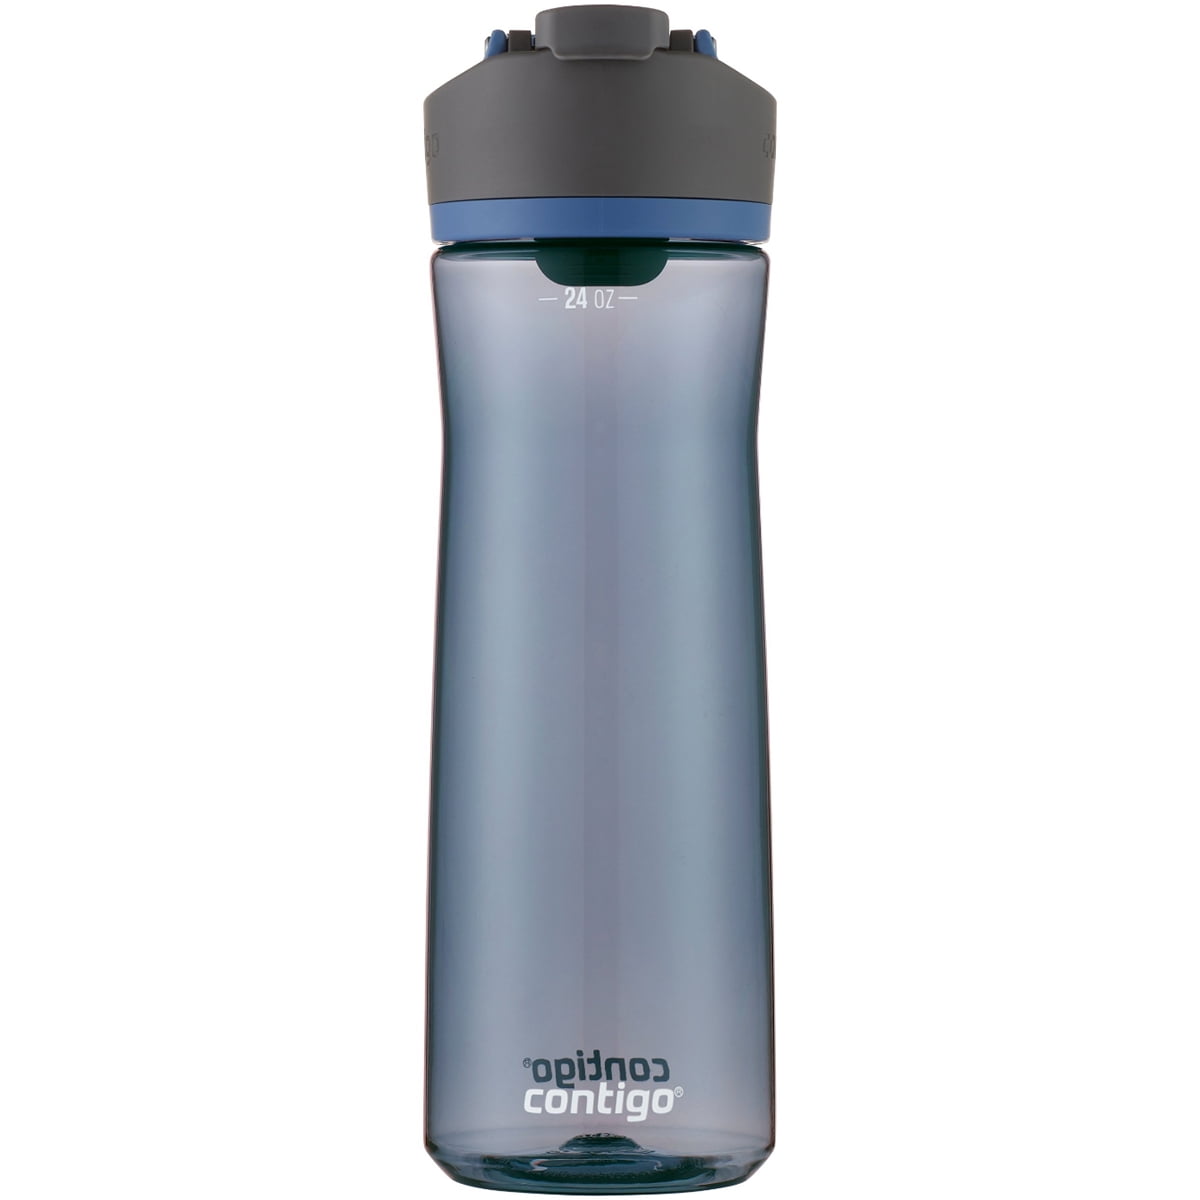 Cortland 2.0, 24oz, Water Bottle with AUTOSEAL® Lid